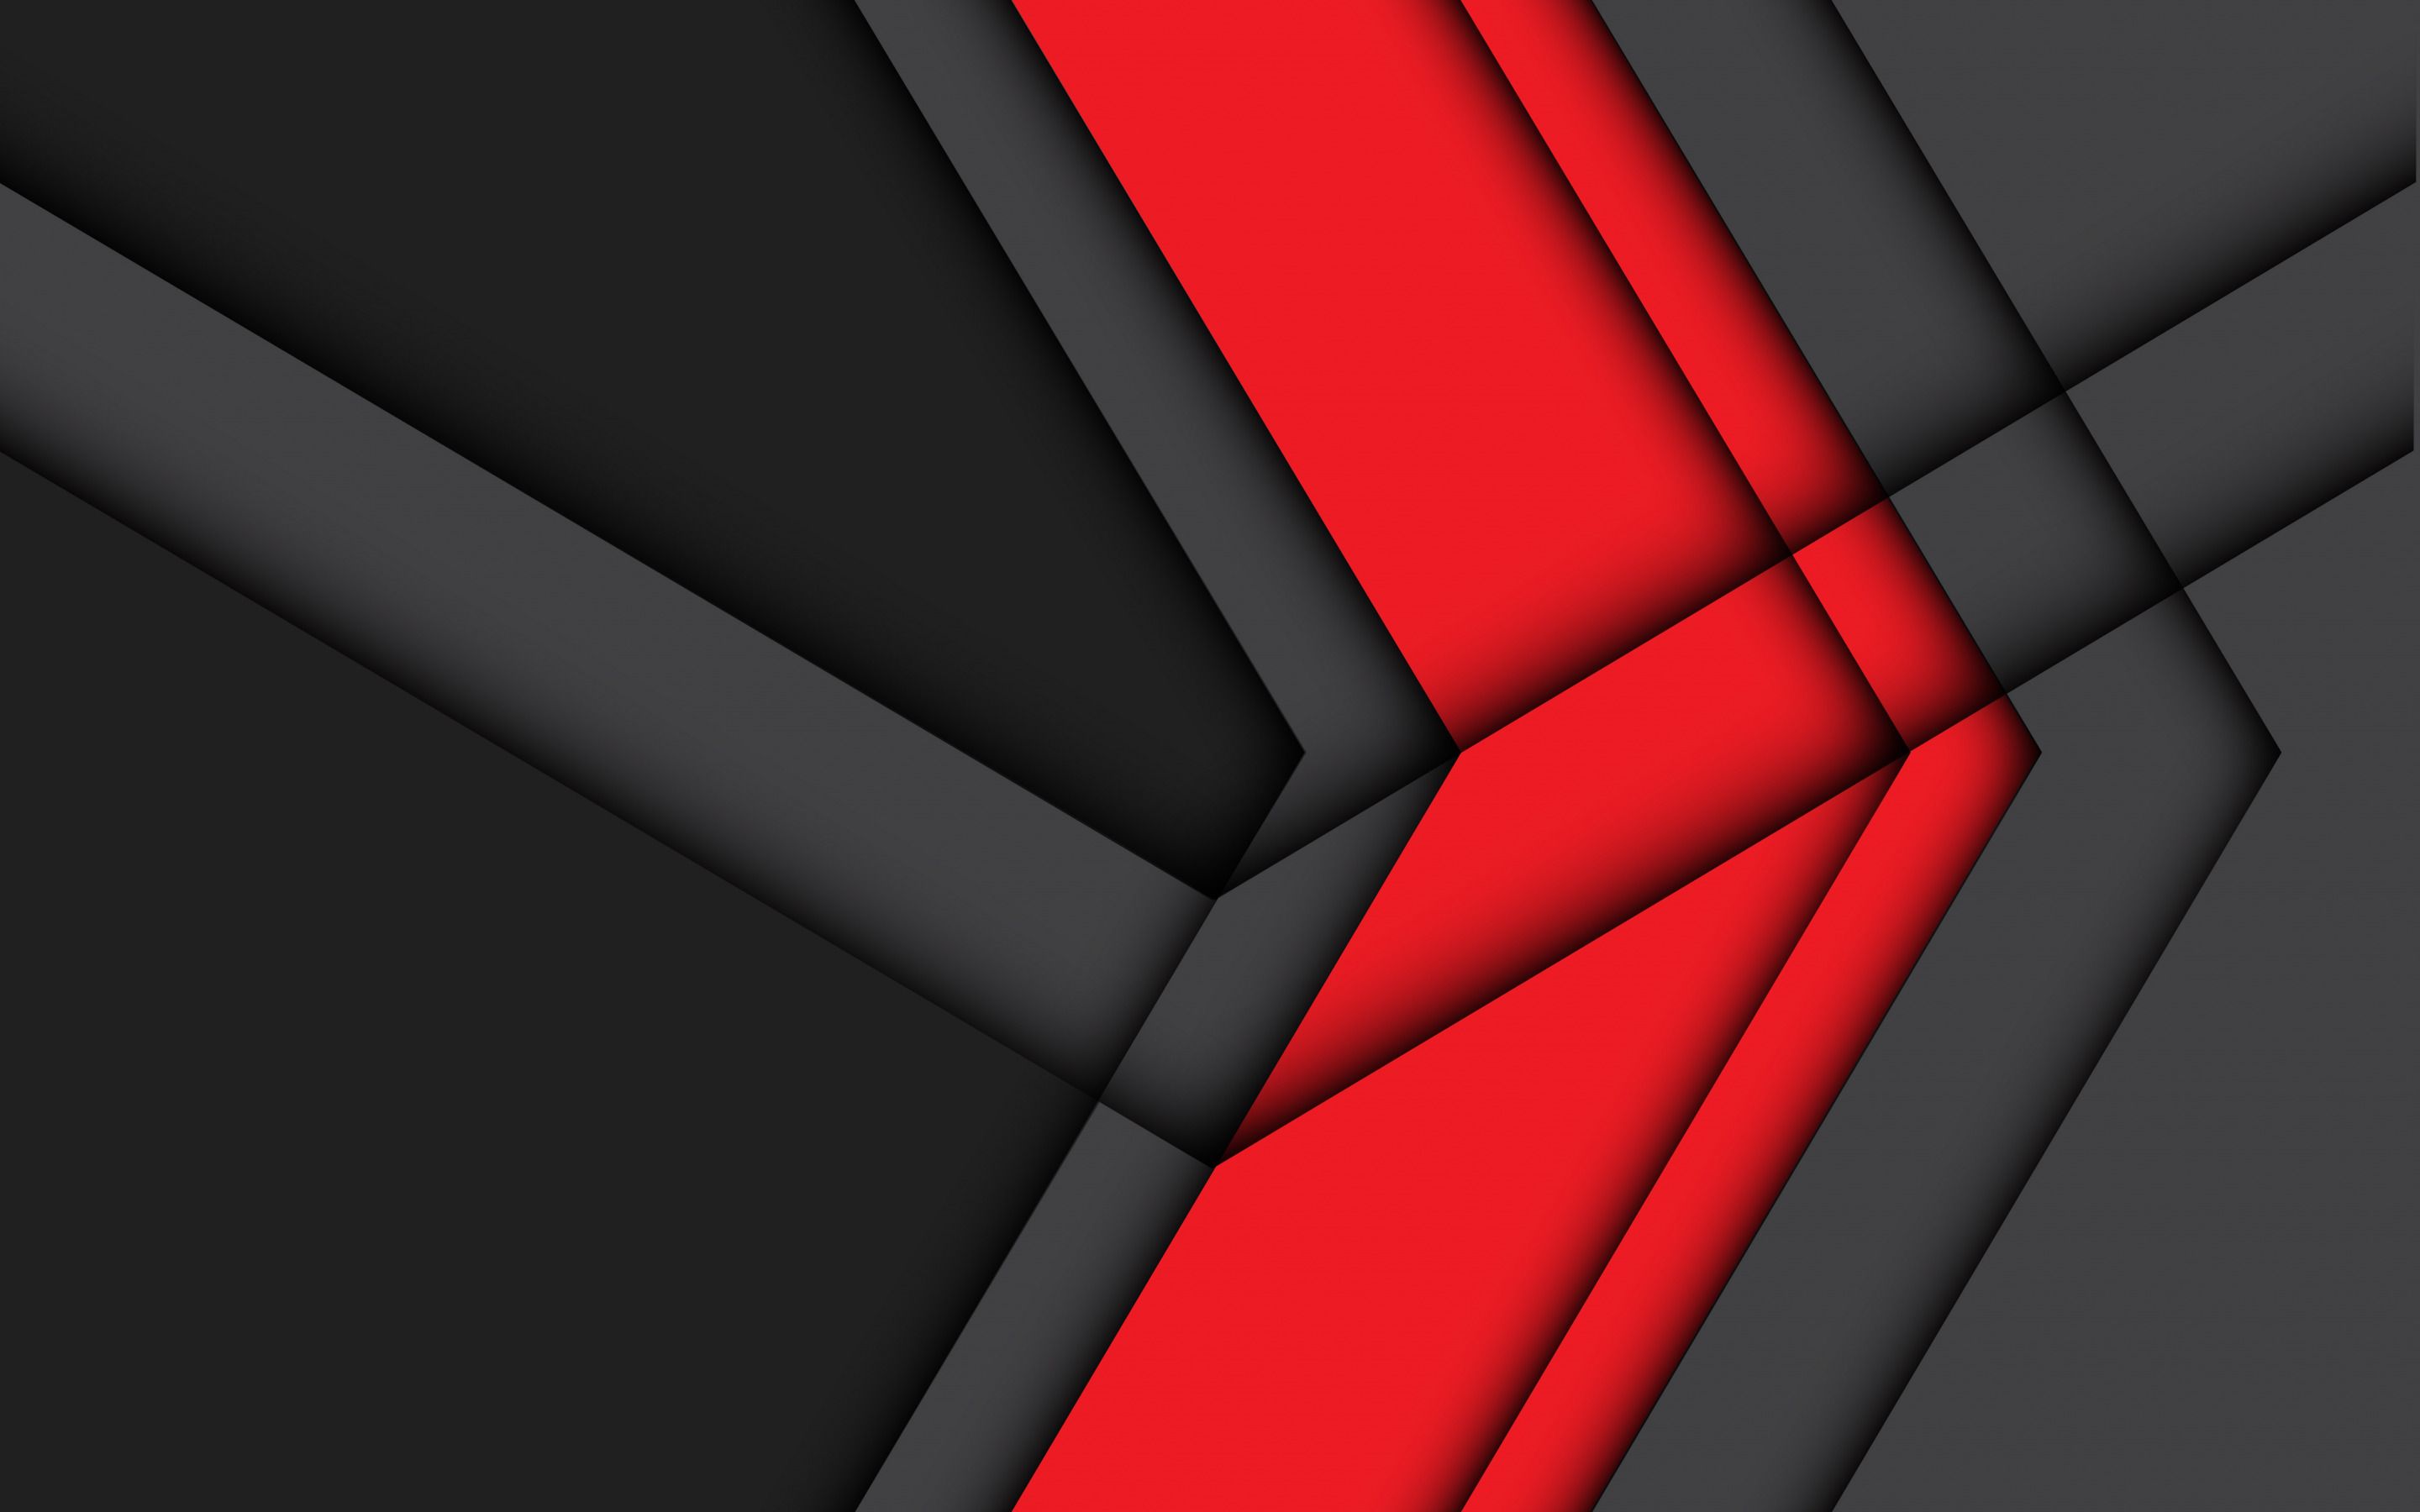 Download wallpaper material design, red arrow, geometric shapes